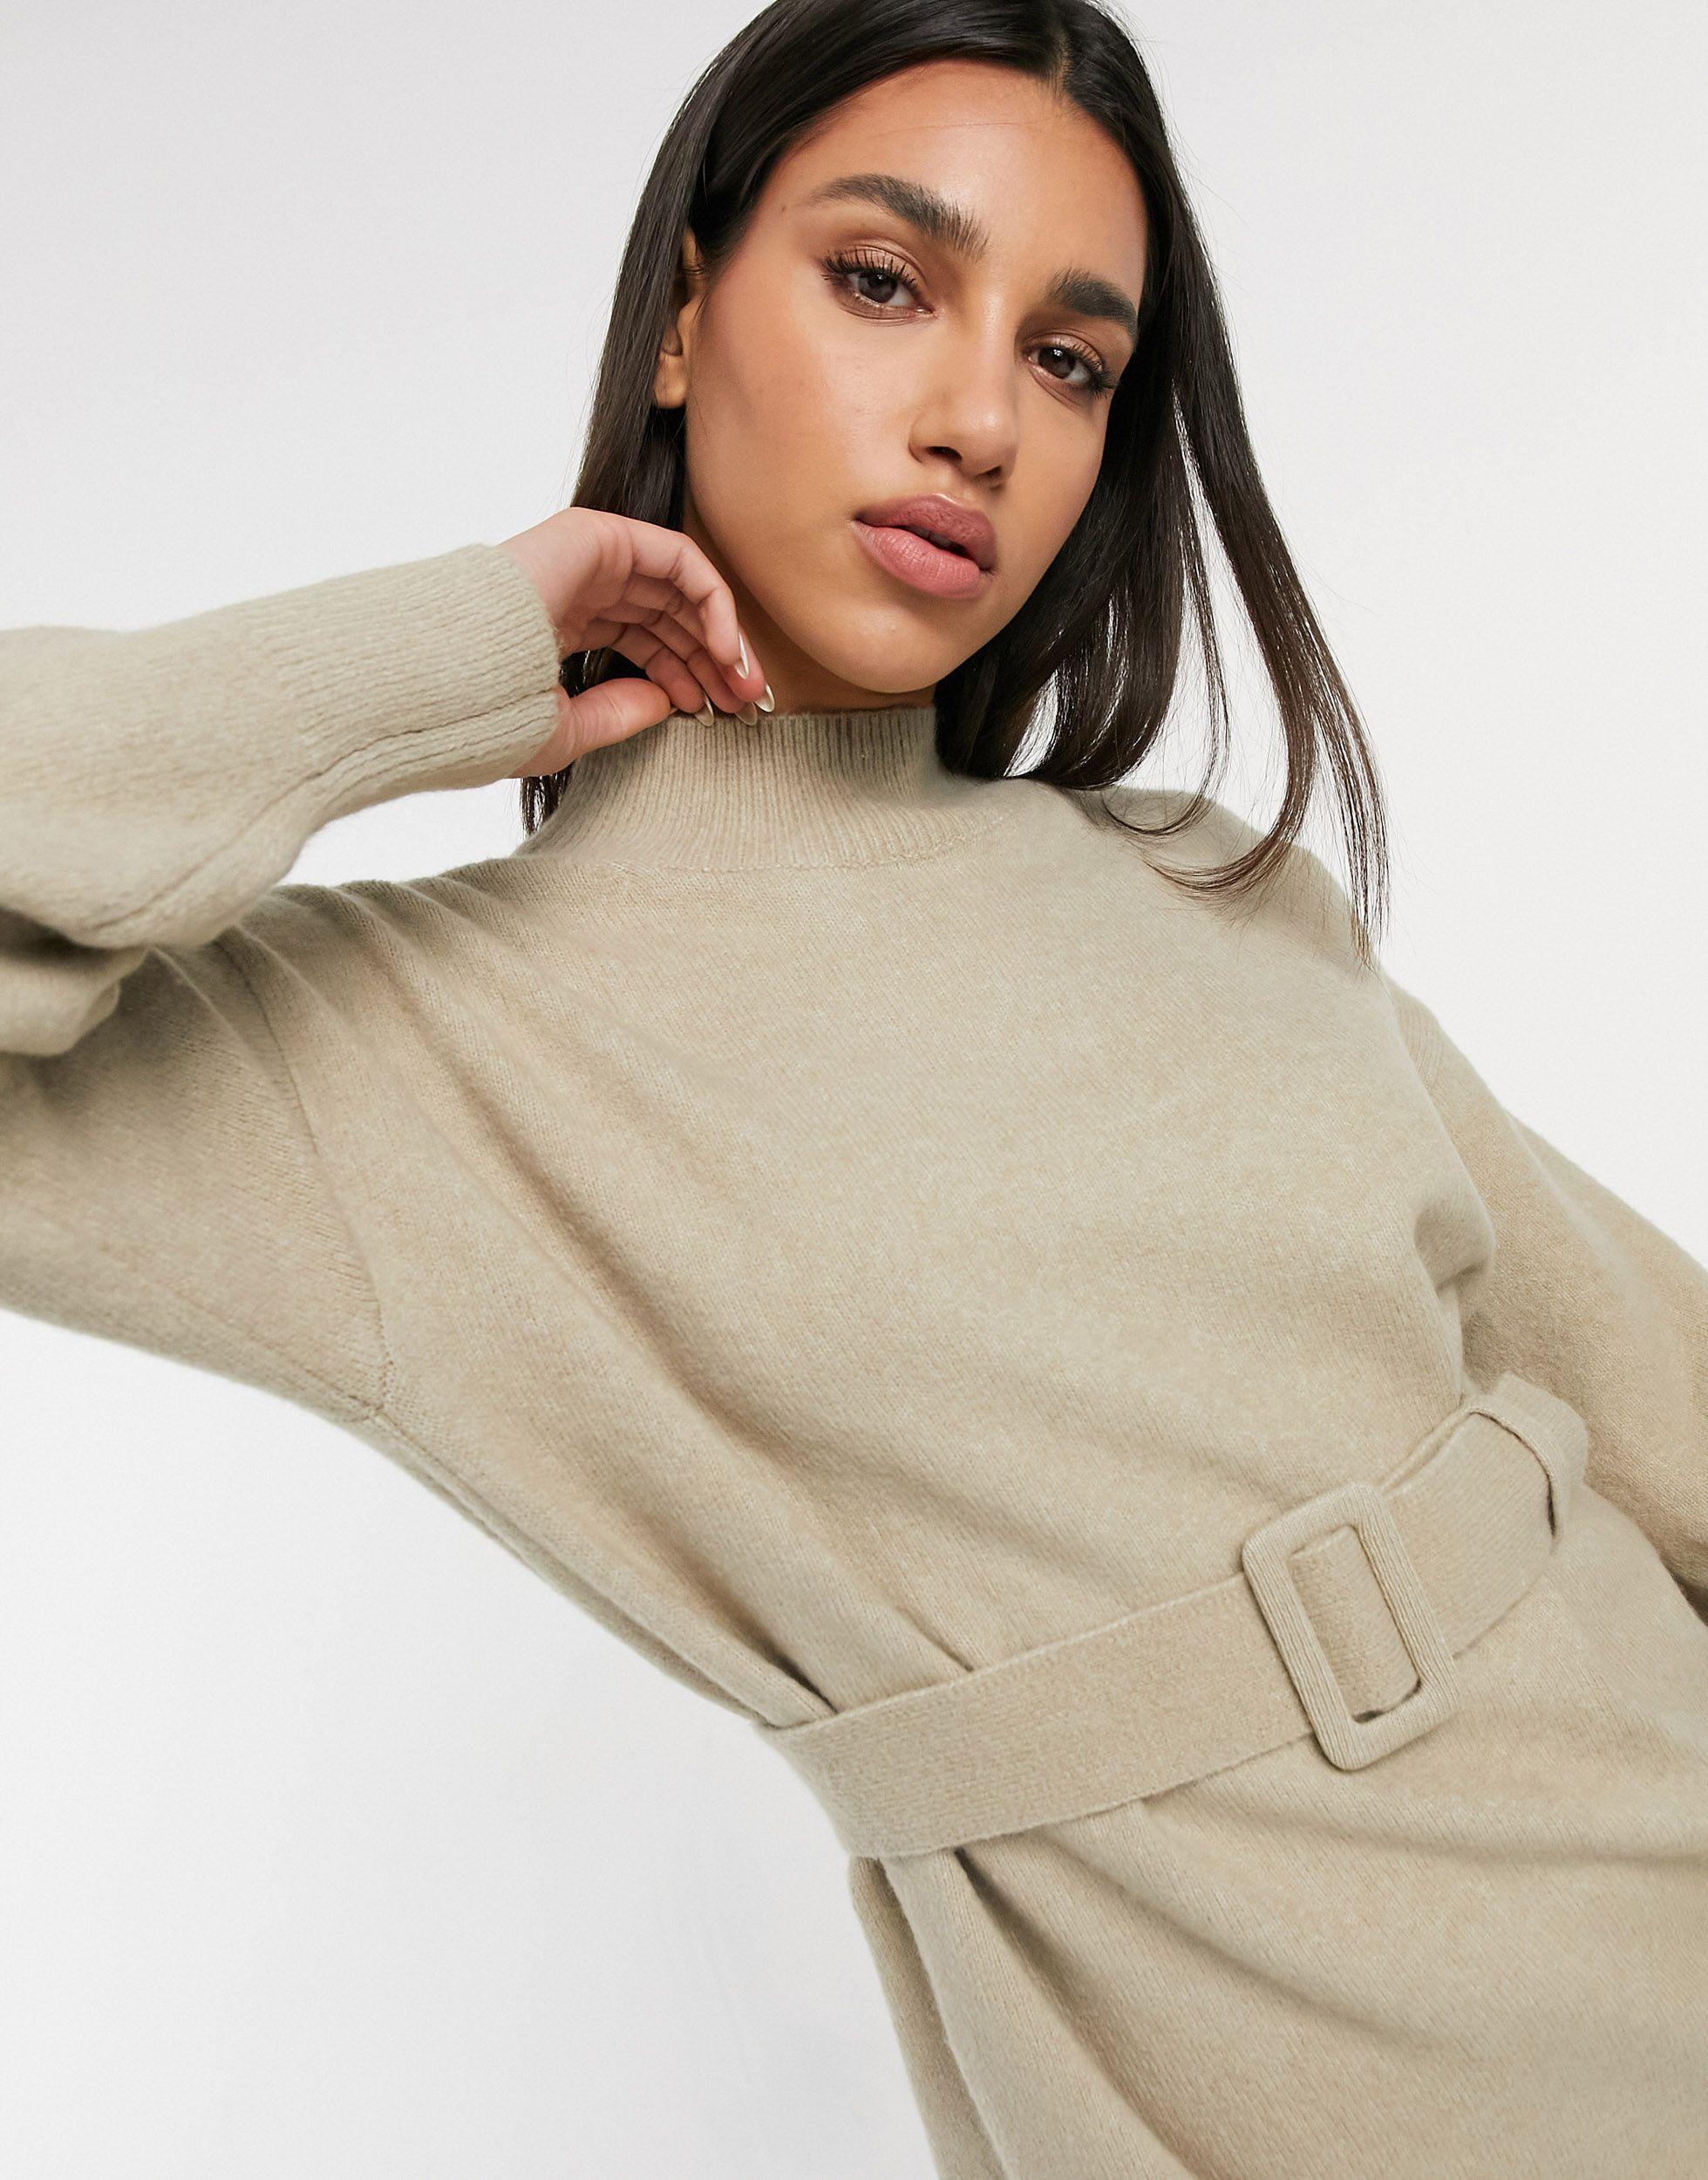 & Other Stories Turtleneck Knit Midi Dress in Beige Womens Dresses & Other Stories Dresses Natural 